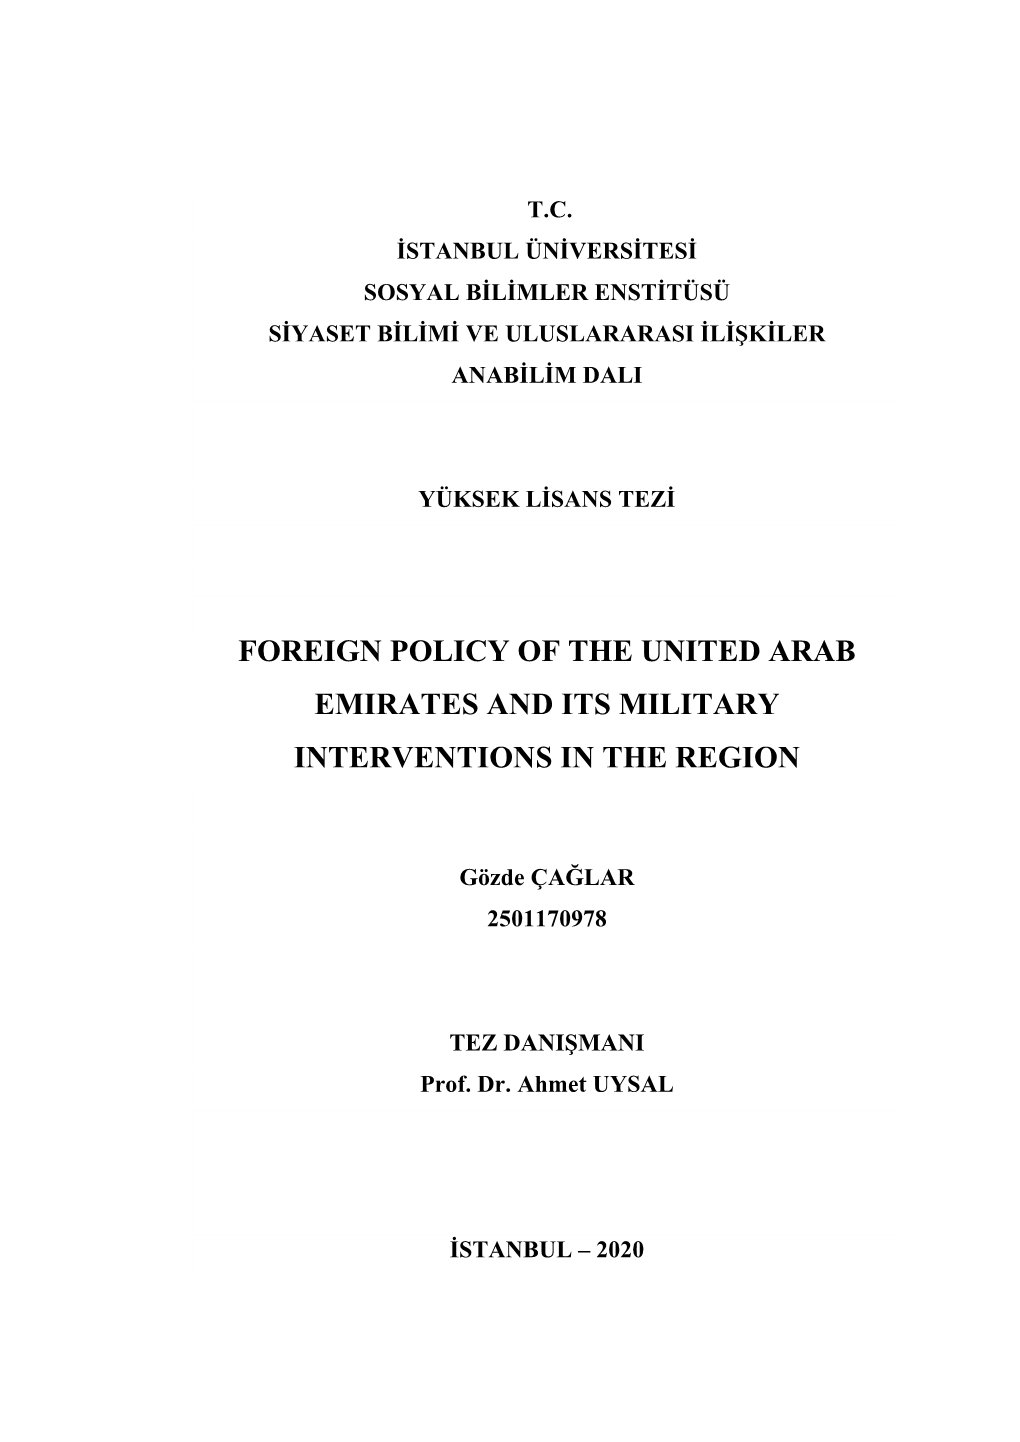 Foreign Policy of the United Arab Emirates and Its Military Interventions in the Region